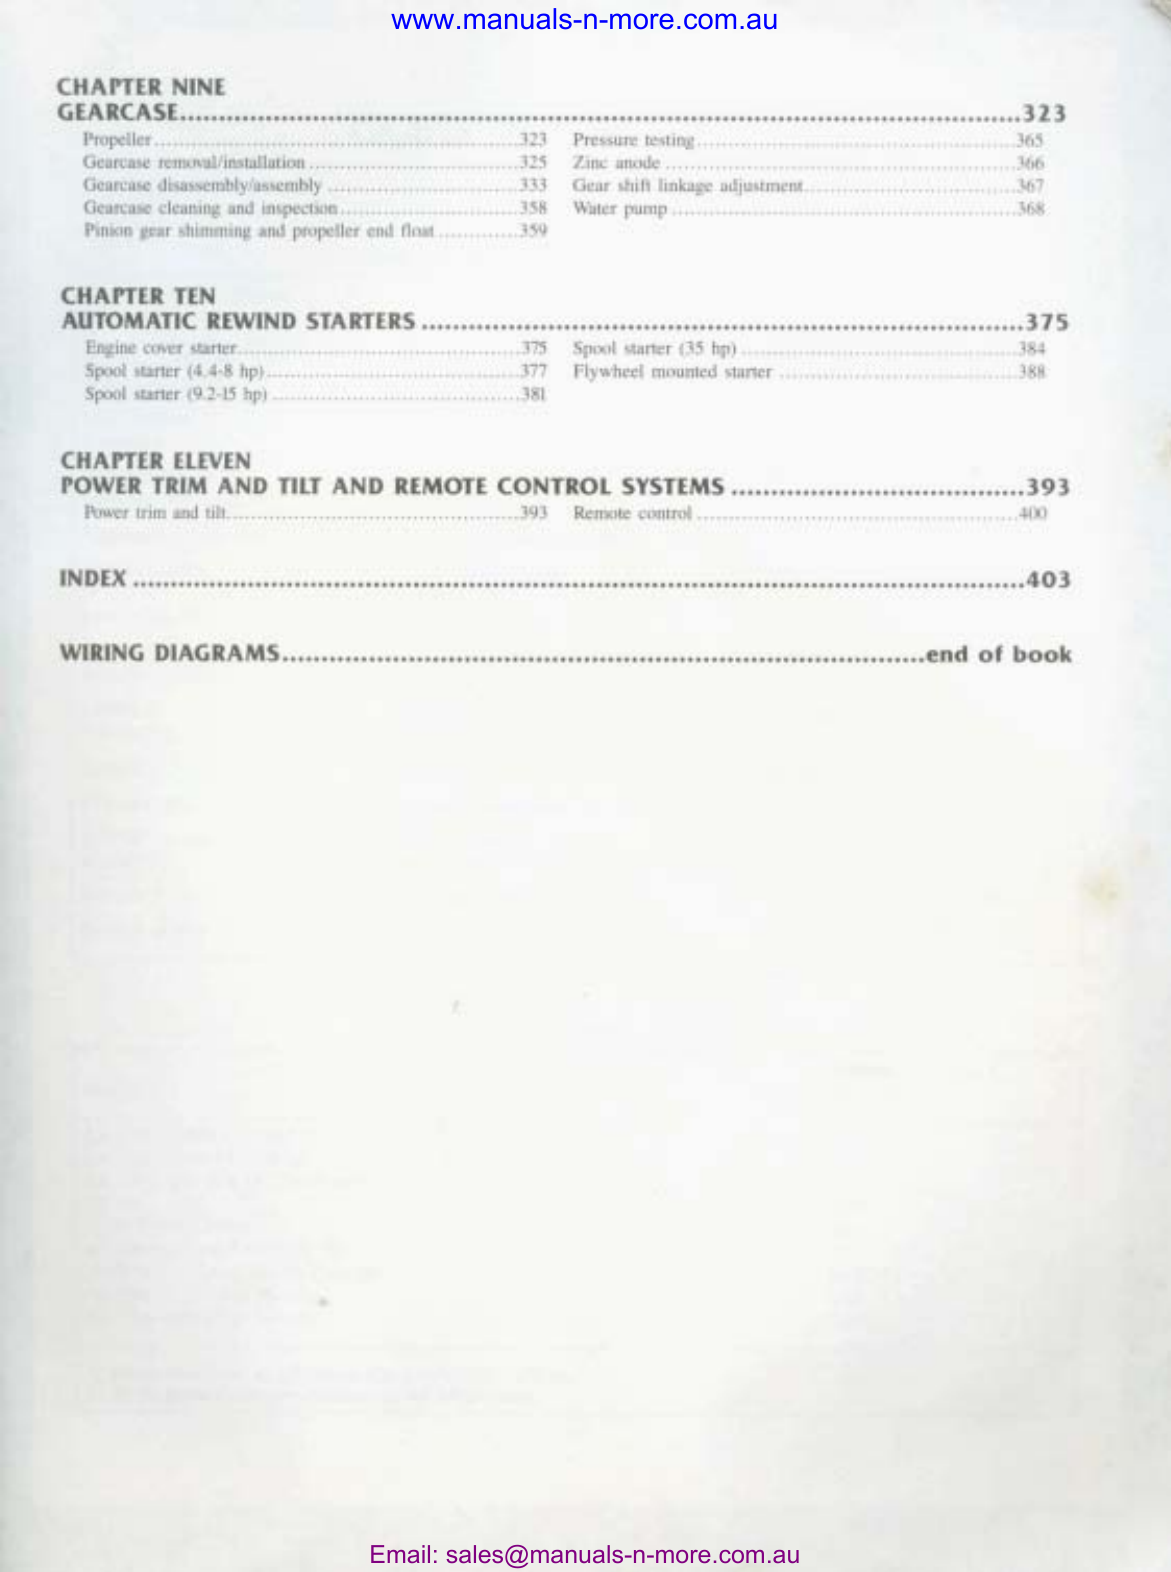 1966-1984 Chrysler 3.5 hp-140hp outboard motor service manual Preview image 4